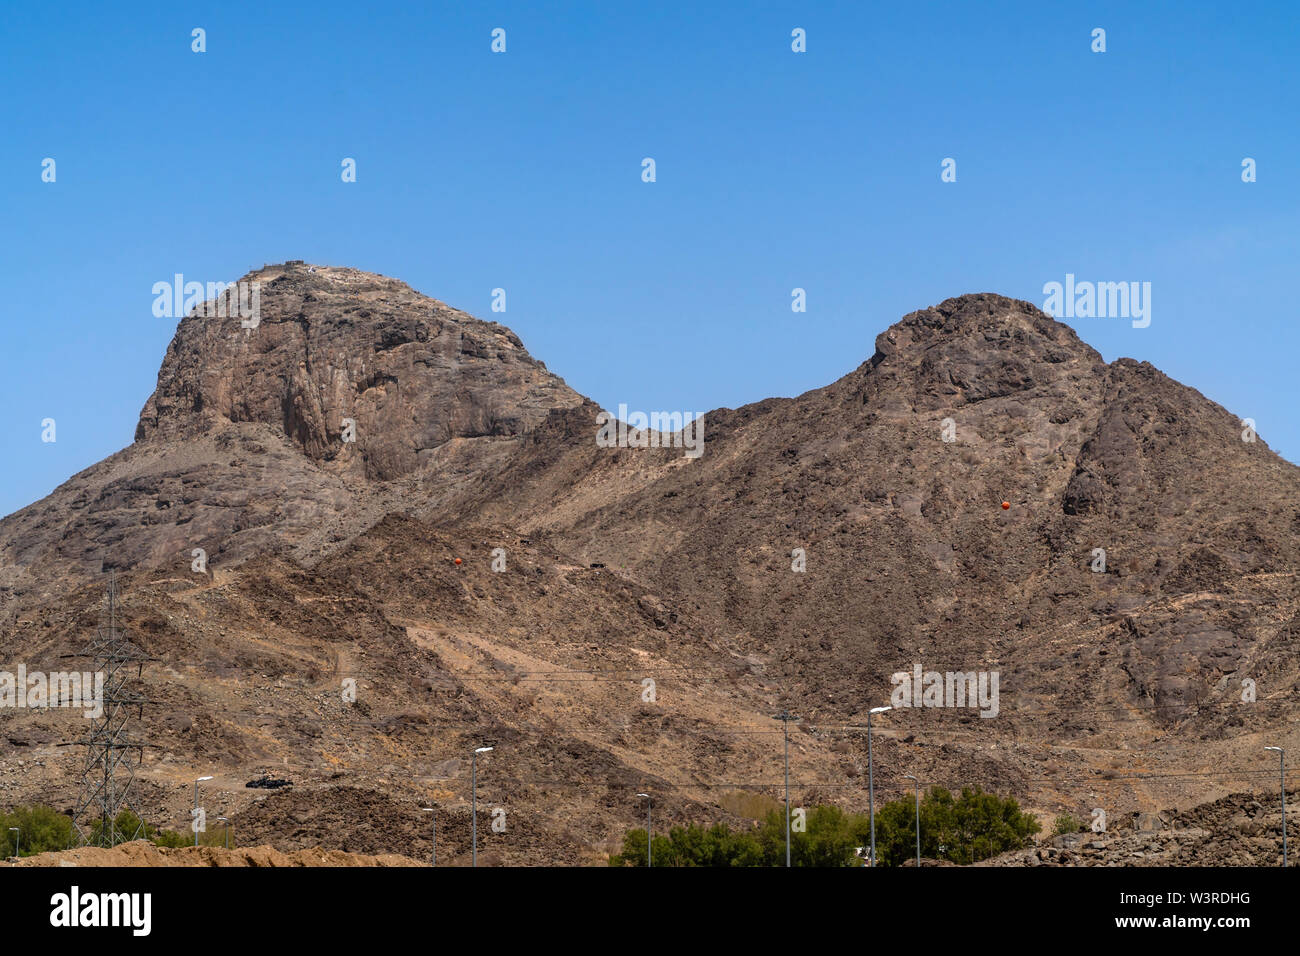 Jabal Nour (Nour Mountain) in Mecca, Saudi Arabia. Prophet Muhammad (peace be upon him) received his first revelation at this mountain. Stock Photo